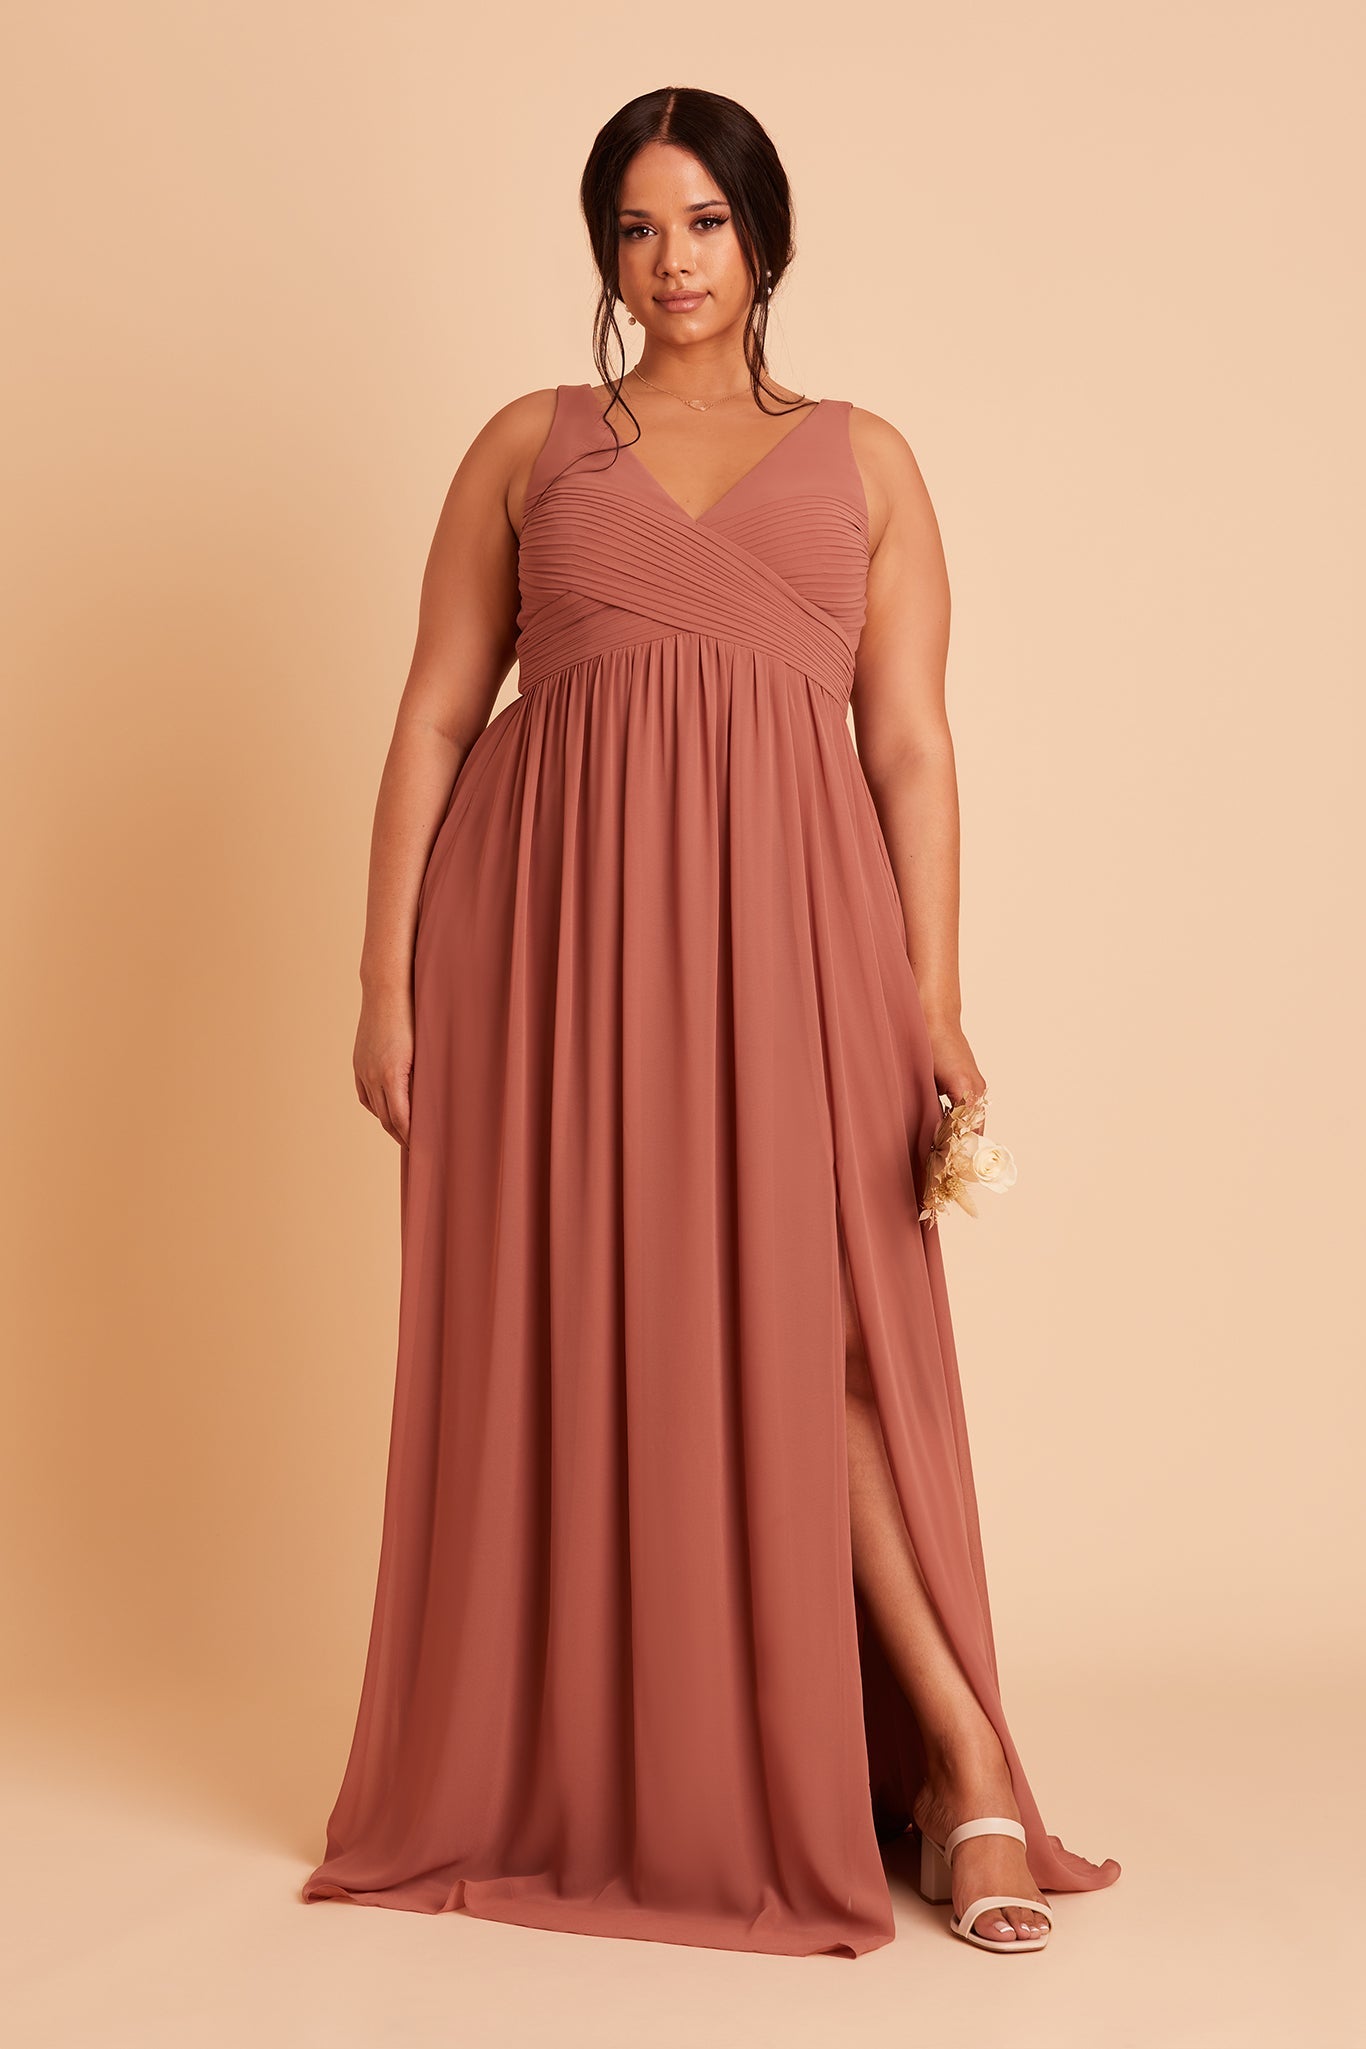 Laurie Empire plus size maternity bridesmaid dress with slit in desert rose chiffon by Birdy Grey, front view